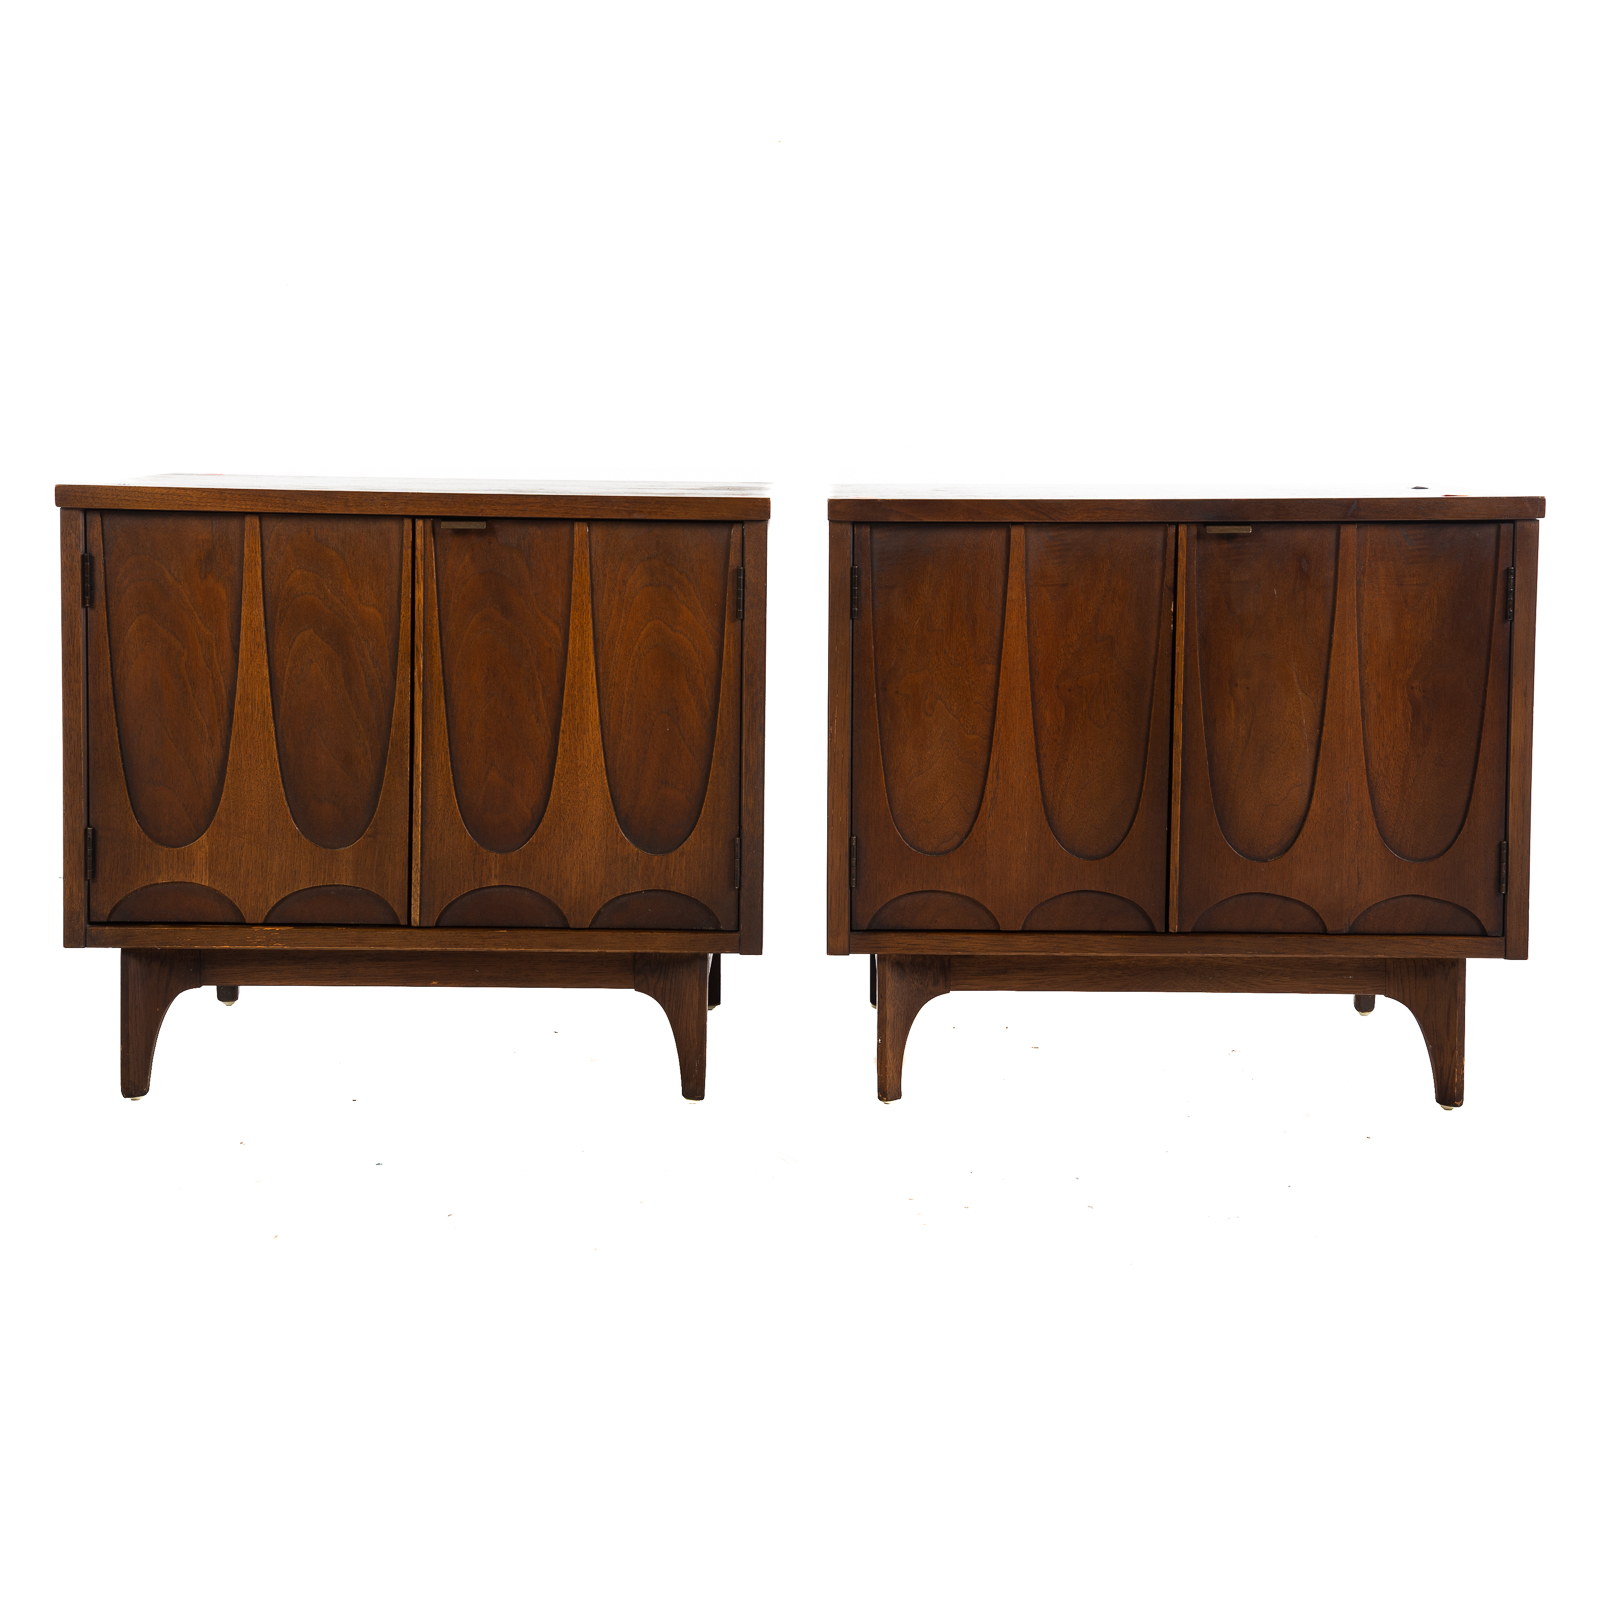 A PAIR OF BROYHILL BRASILIA STANDS